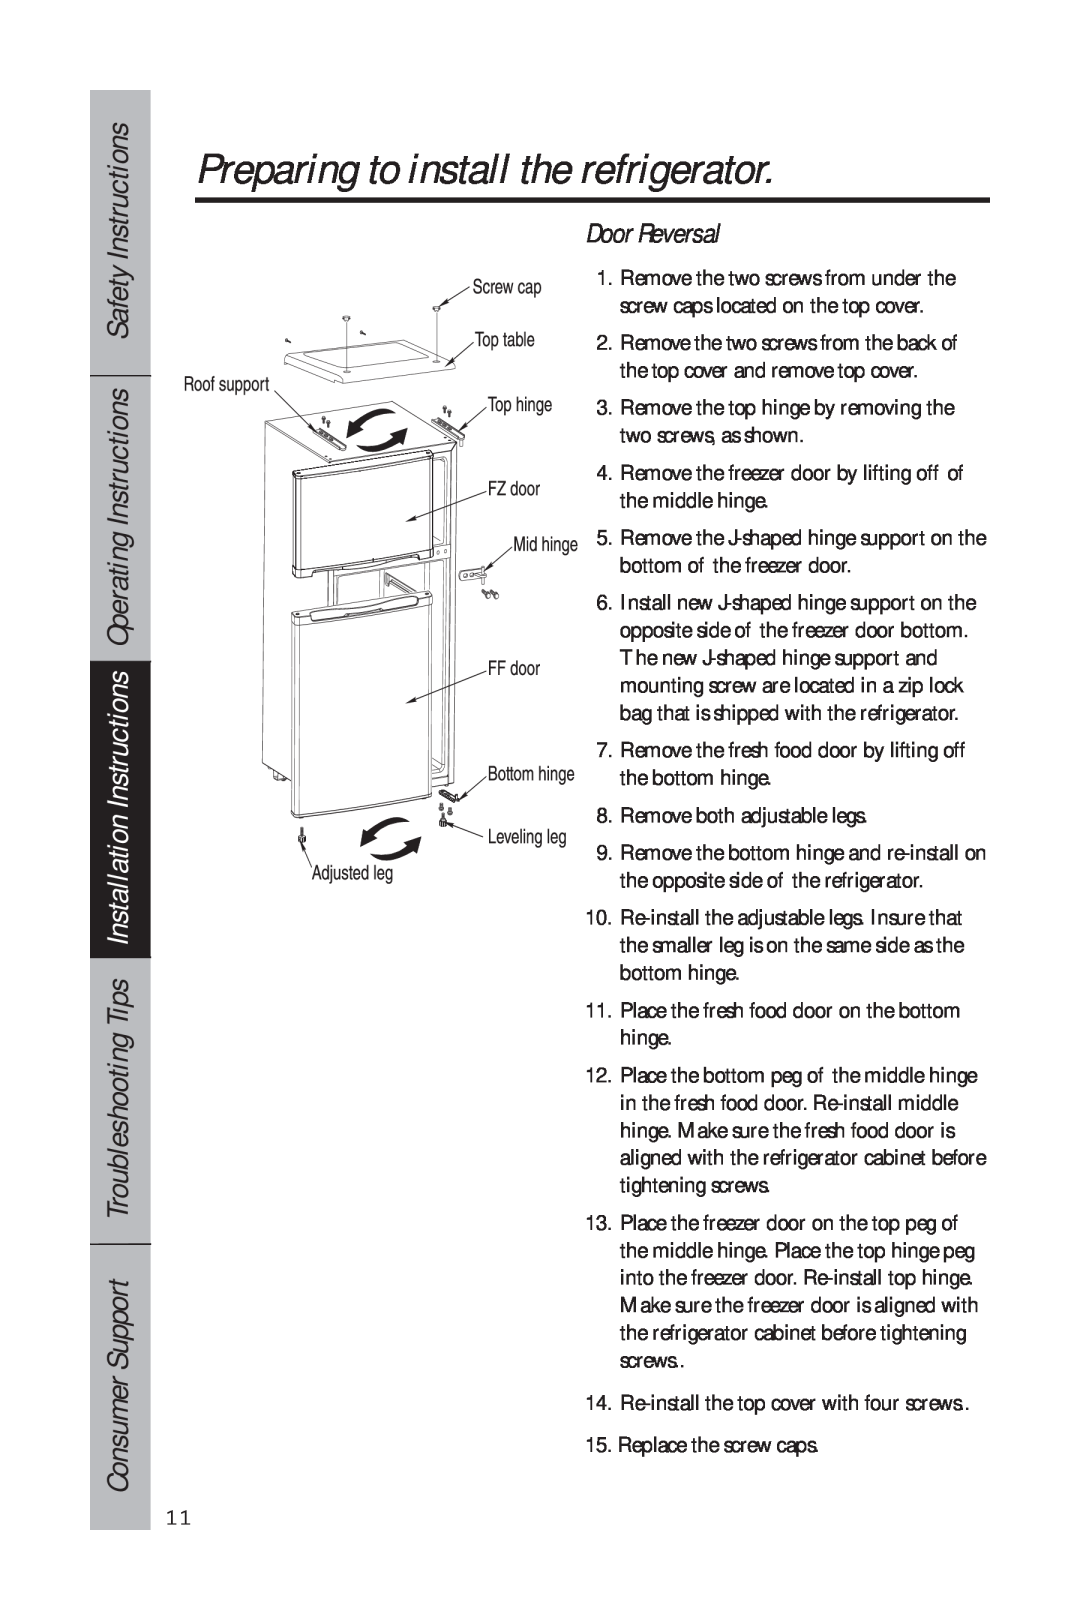 GE 49-60634-1 owner manual Door Reversal, Preparing to install the refrigerator, Remove the two screws from the back of 